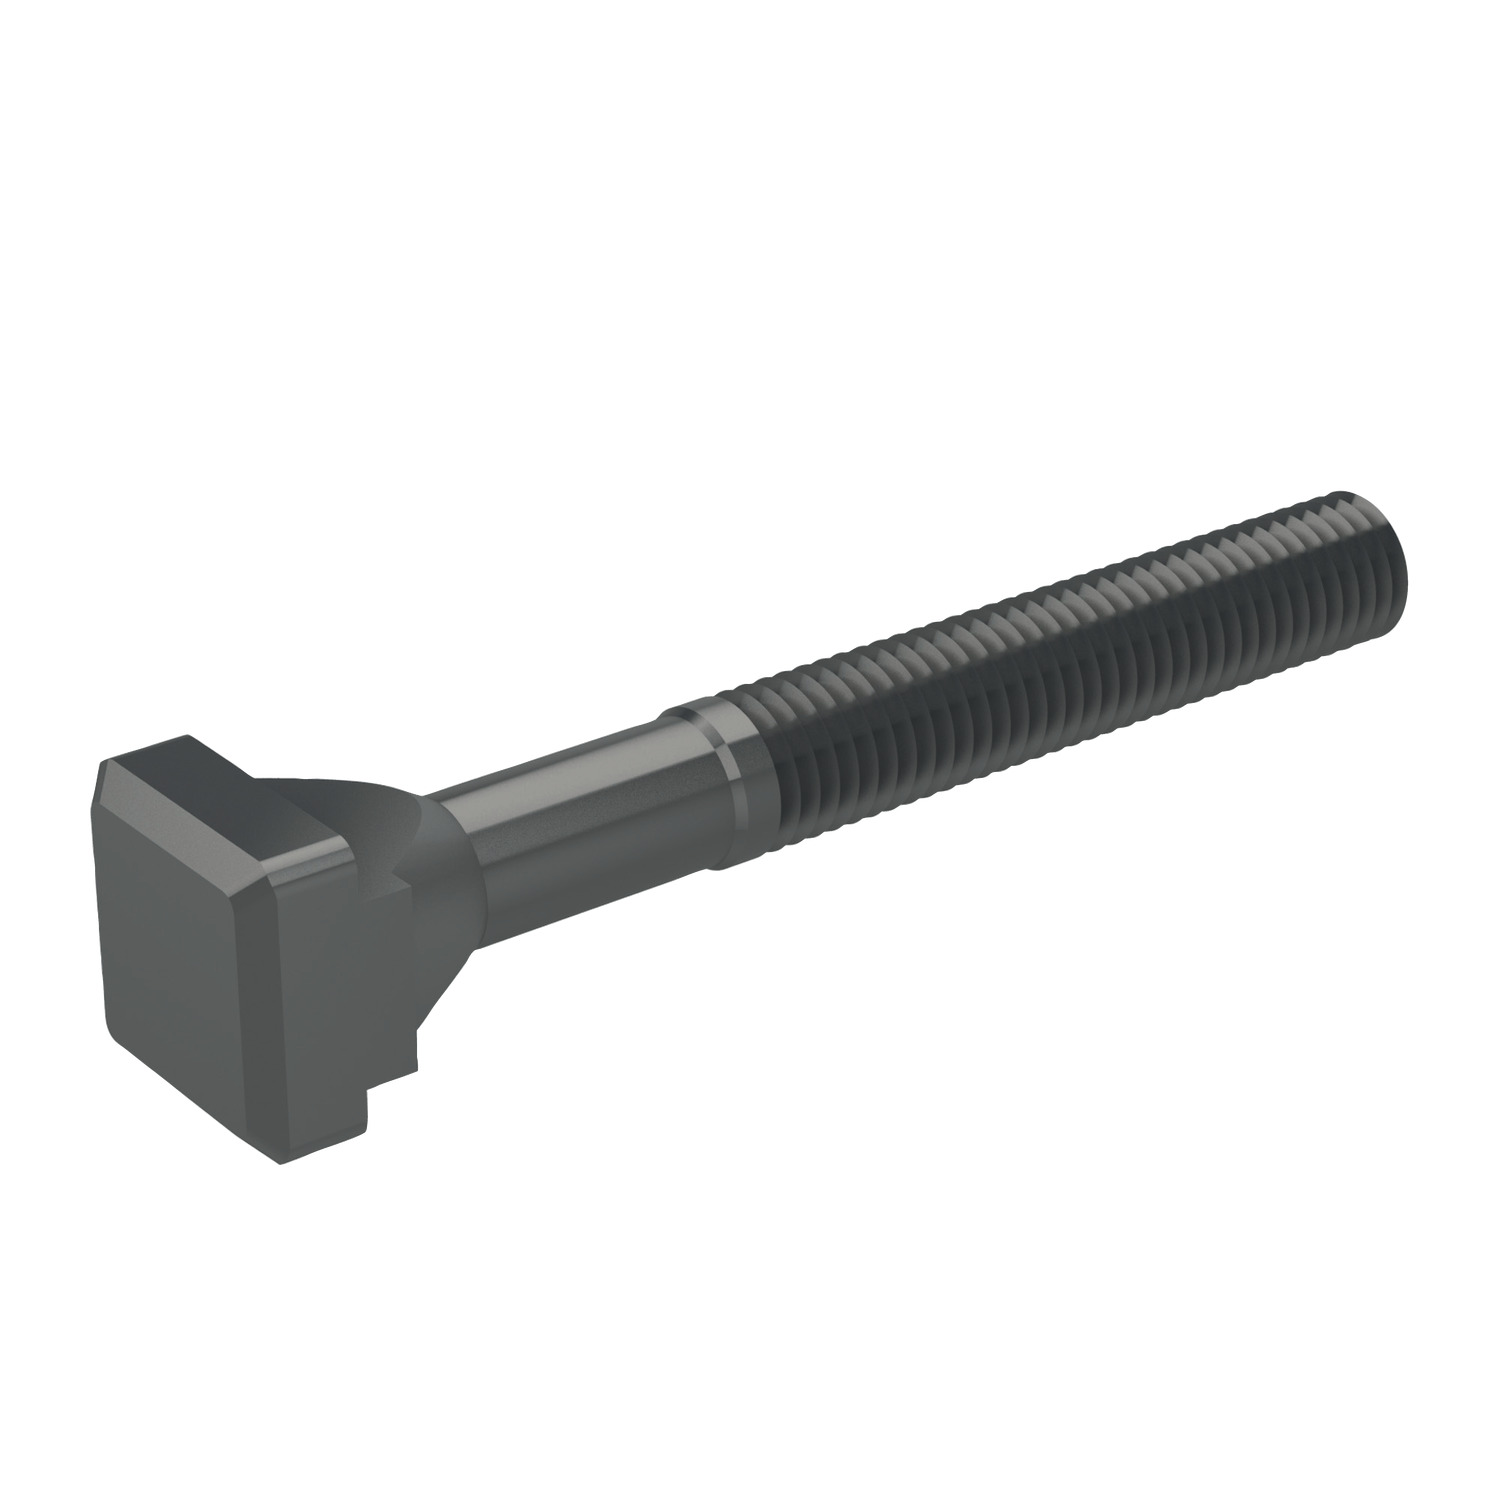 Product 21050, T-Slot Bolts extra strength - class 12,9 / 